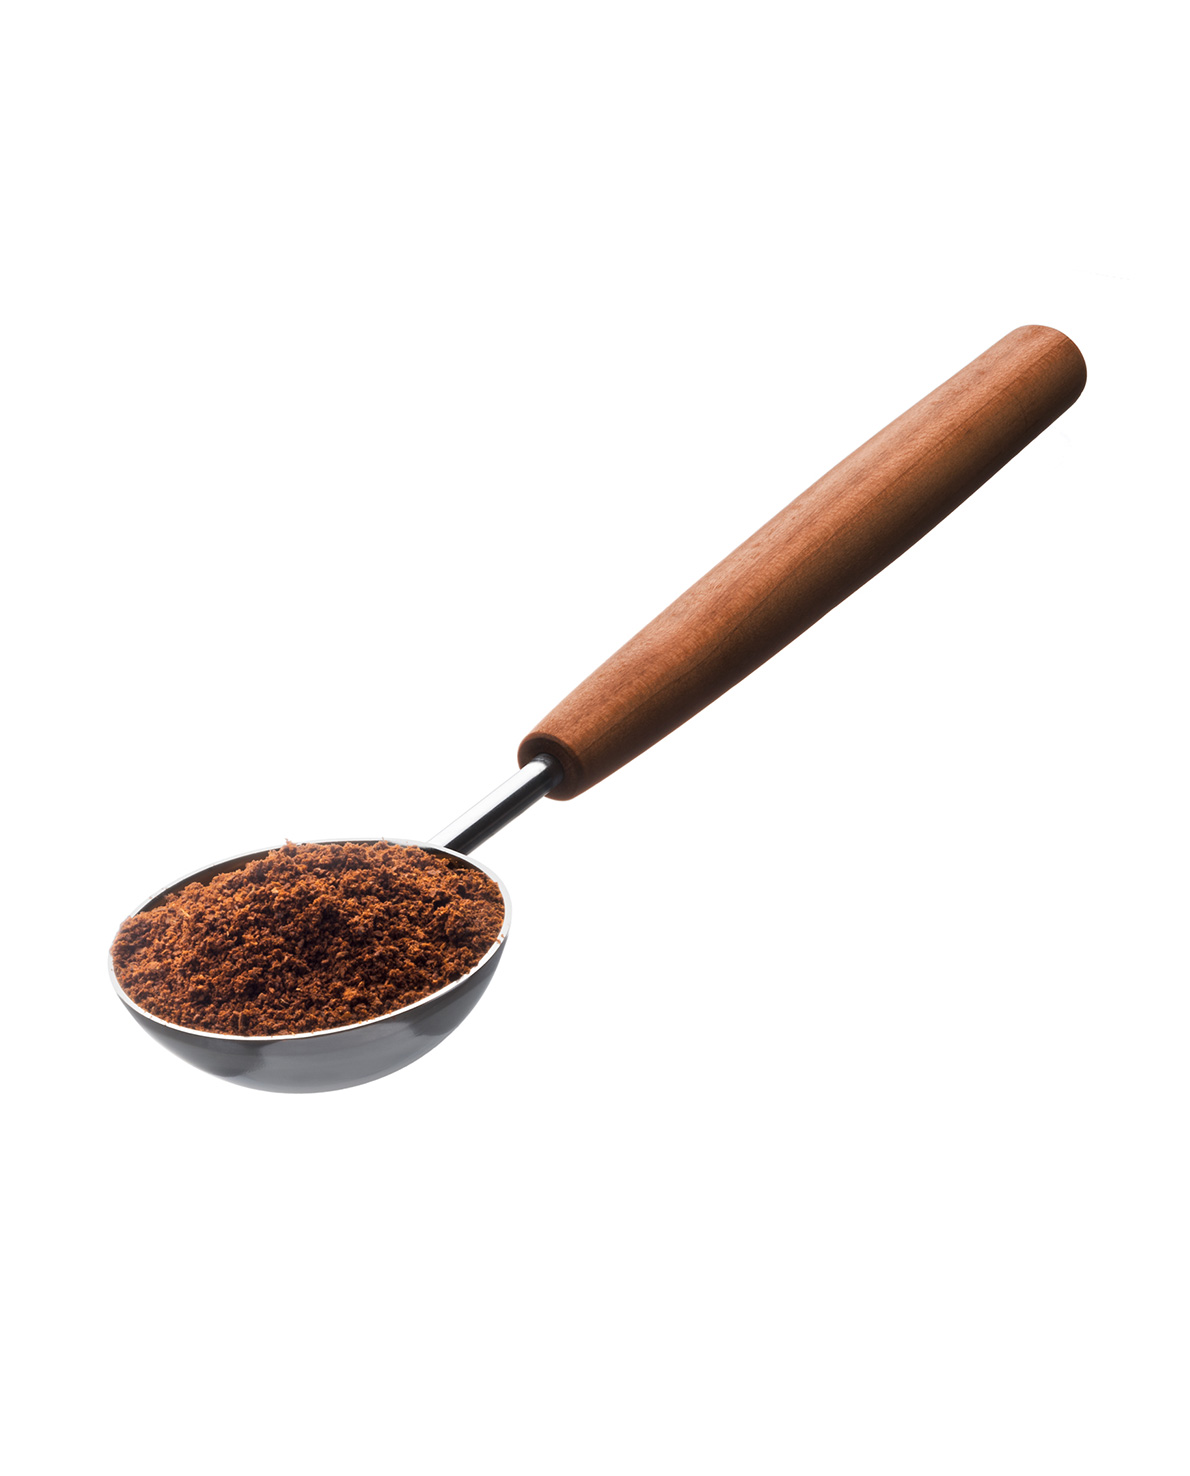 triangle Coffe Tea Measuring Spoon Soul scoop tablespoon 1tbs wood sustainable Made in Germany Solingen